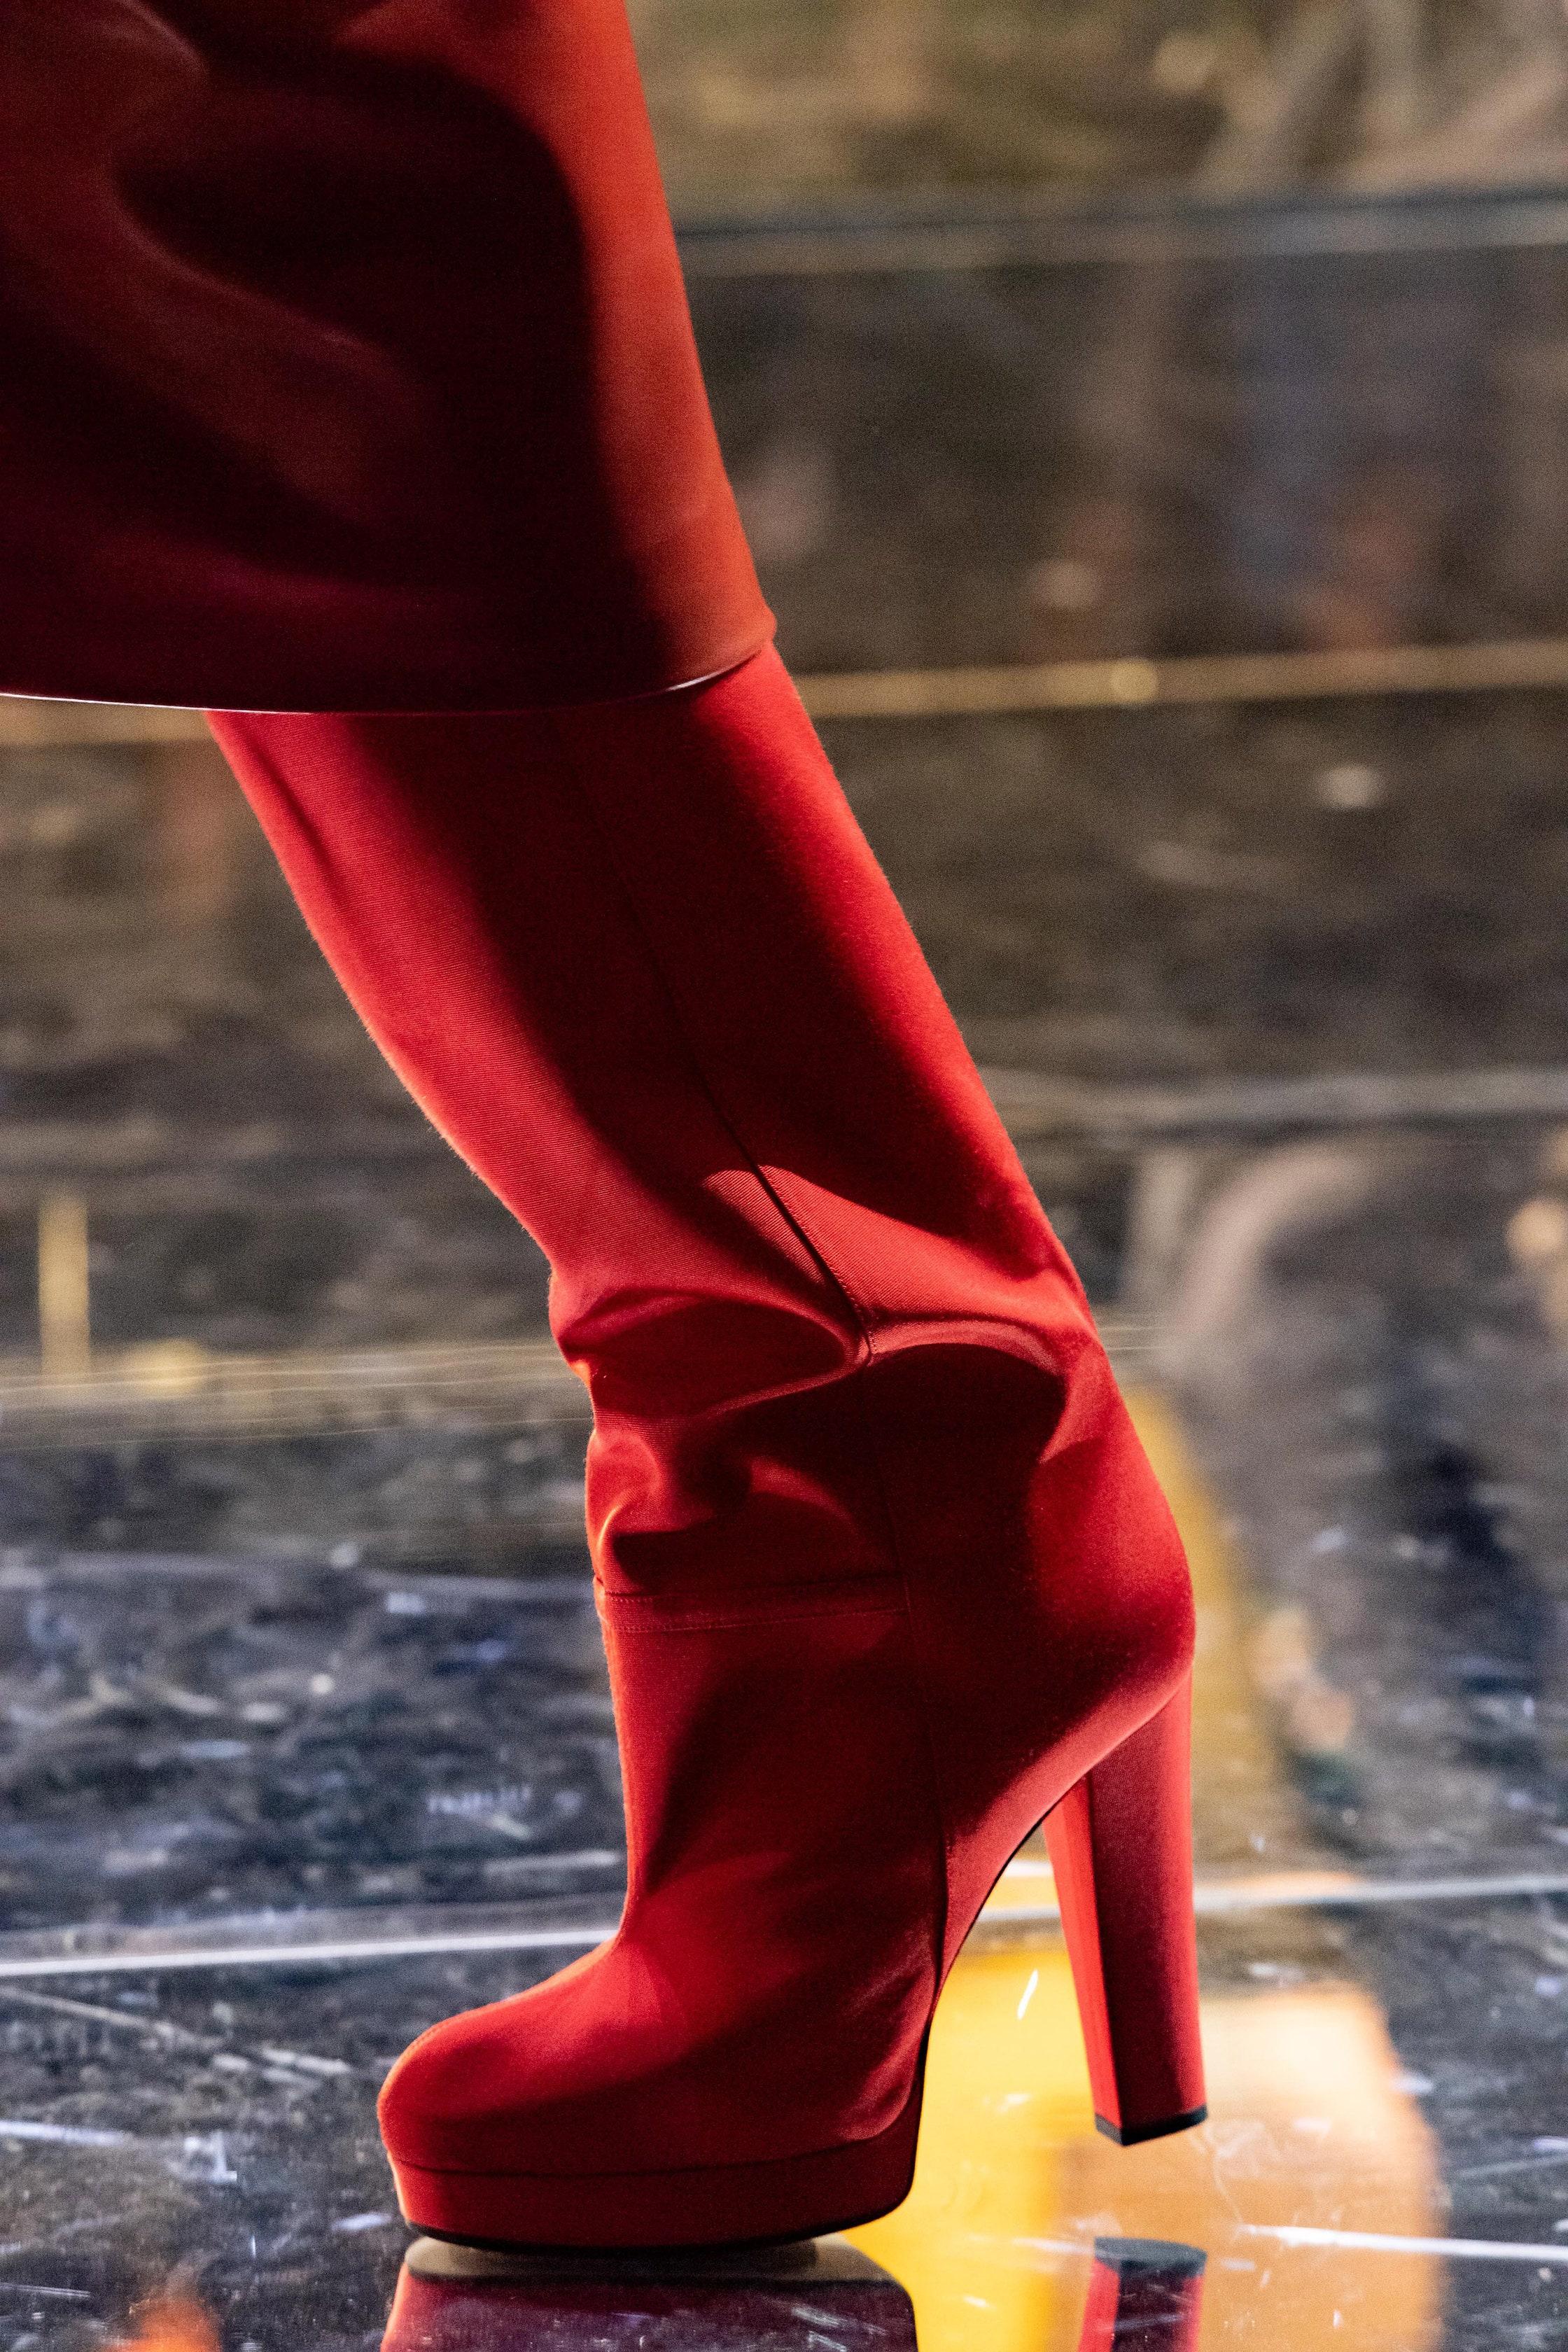 New With Box Gucci Fall 2019 Alessandro Michele Red Boots Sz 38 For Sale 9